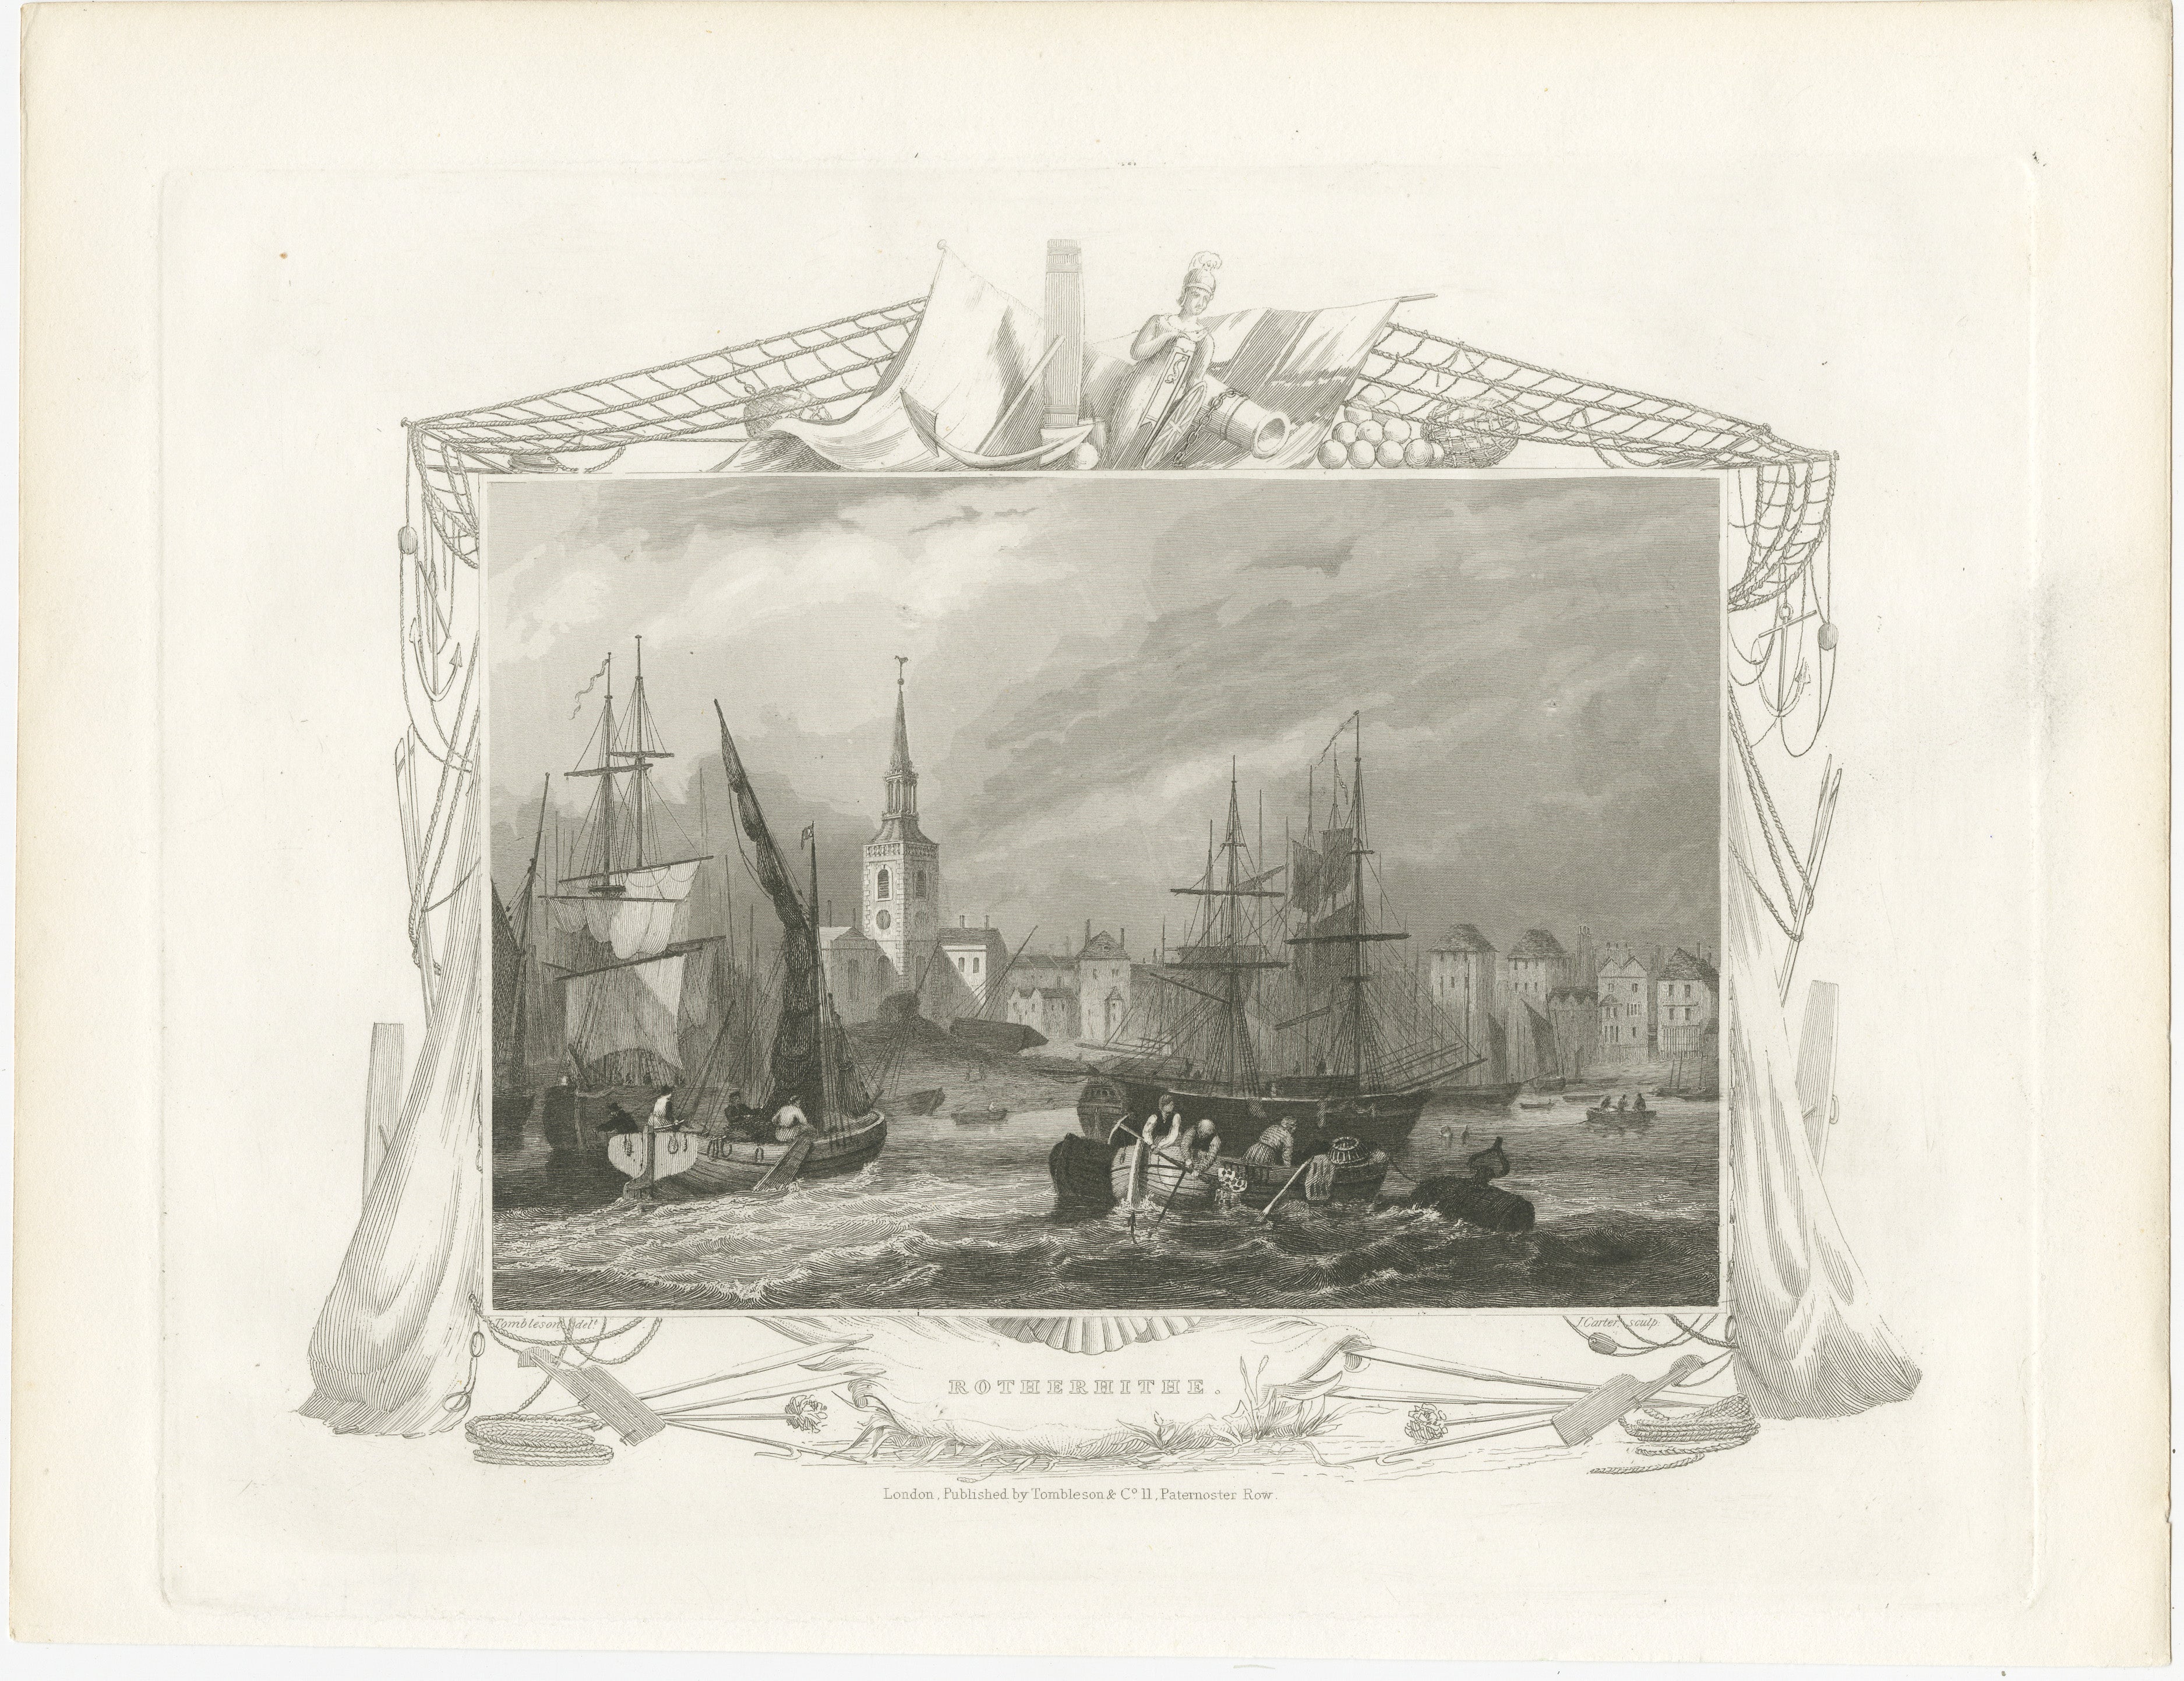 The engraving depicts a vivid scene from the banks of the River Thames, offering a glimpse into the bustling maritime life of Rotherhithe in the early 19th century. 

In the foreground, we see fishermen engaged in their daily labor, hauling in their